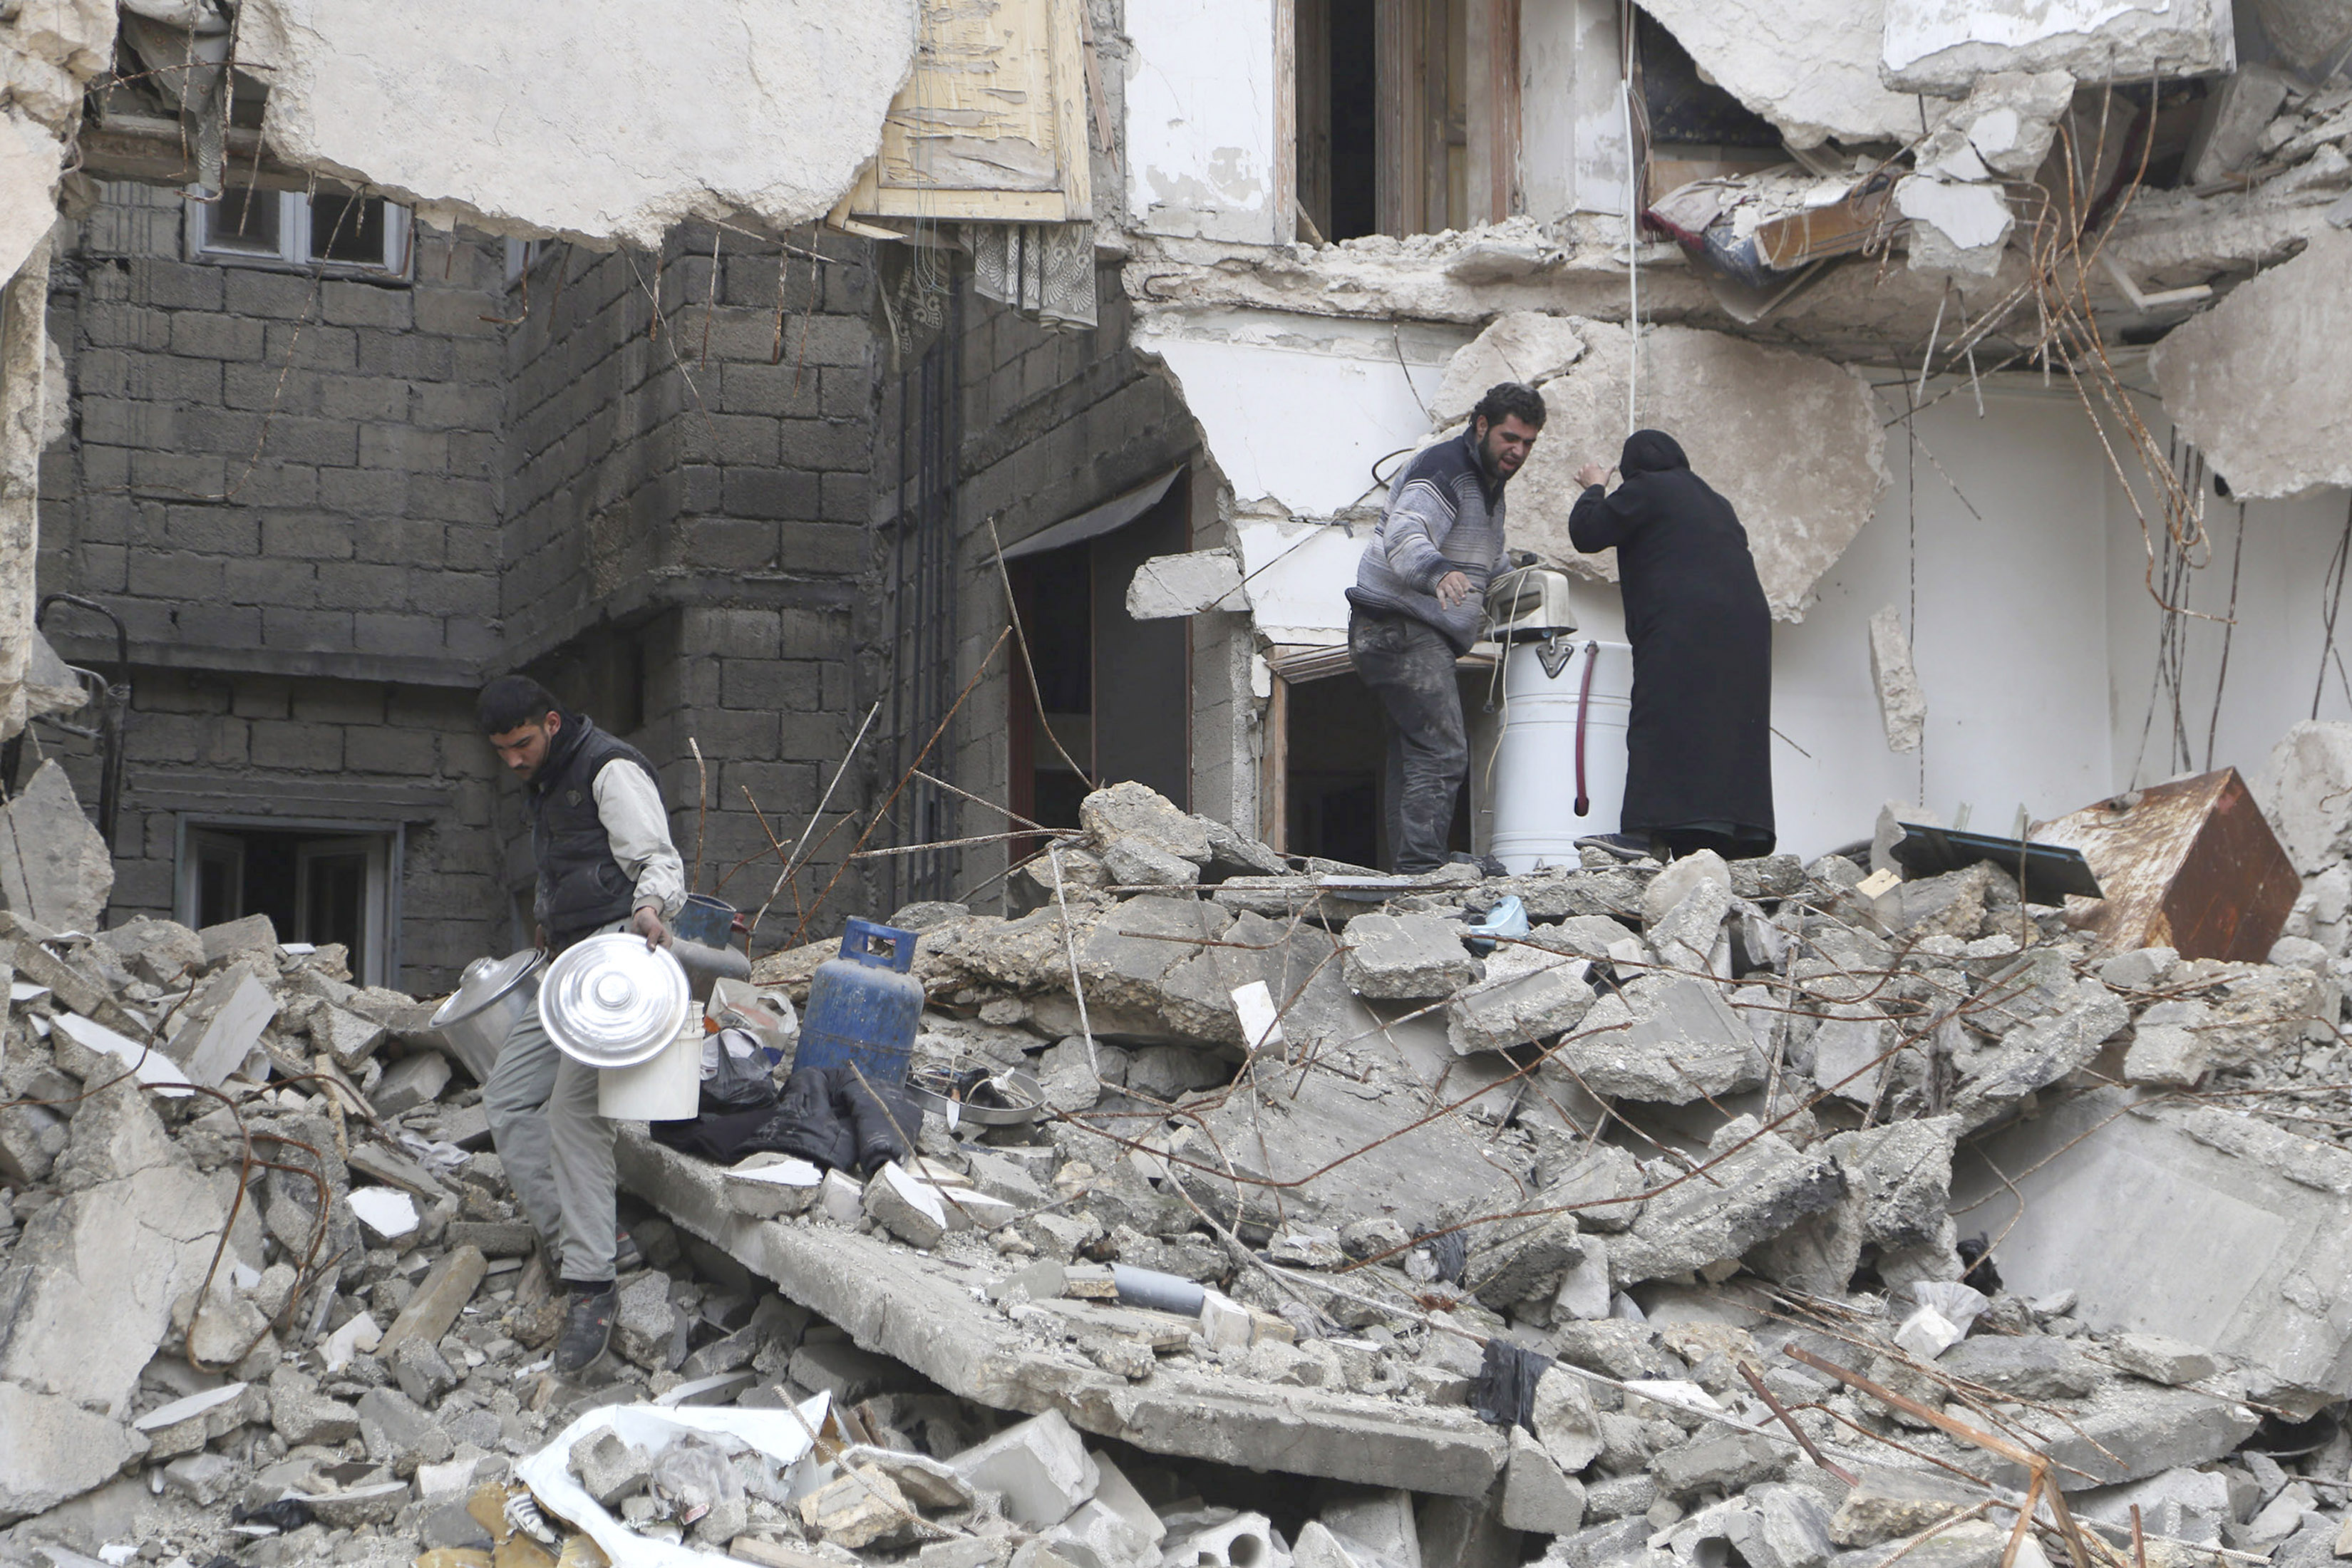 Residents look for belongings amid debris of a collapsed building in Aleppo December 31, 2014. (Hamid Khatib—Reuters)